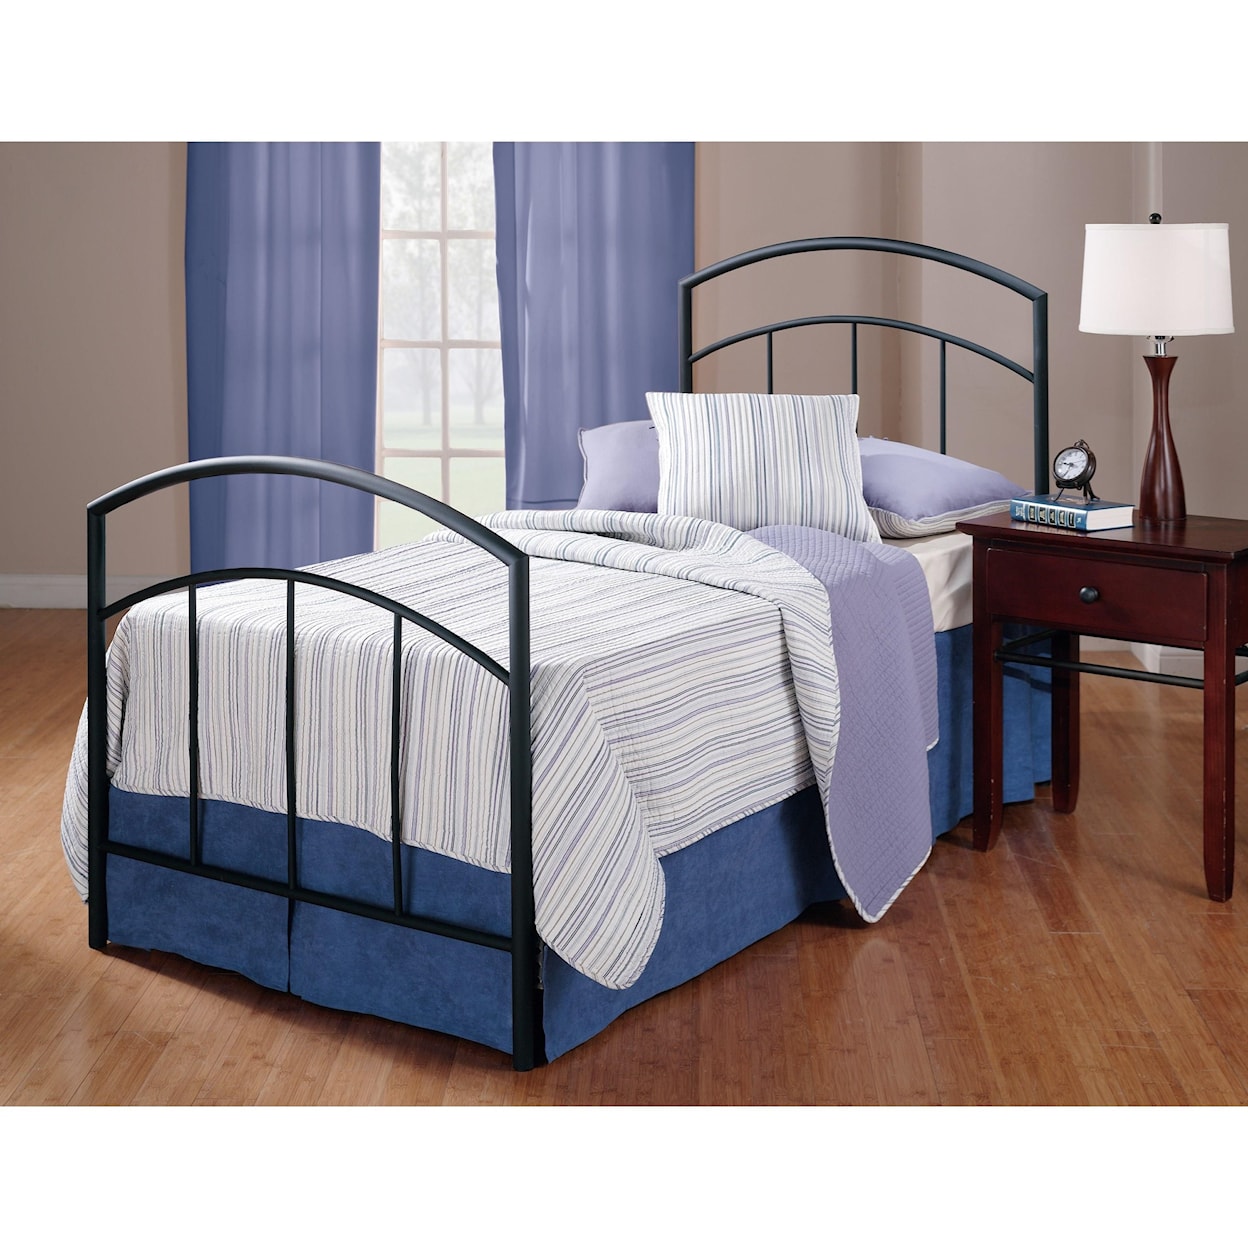 Hillsdale Metal Beds Twin Bed Set with Rails